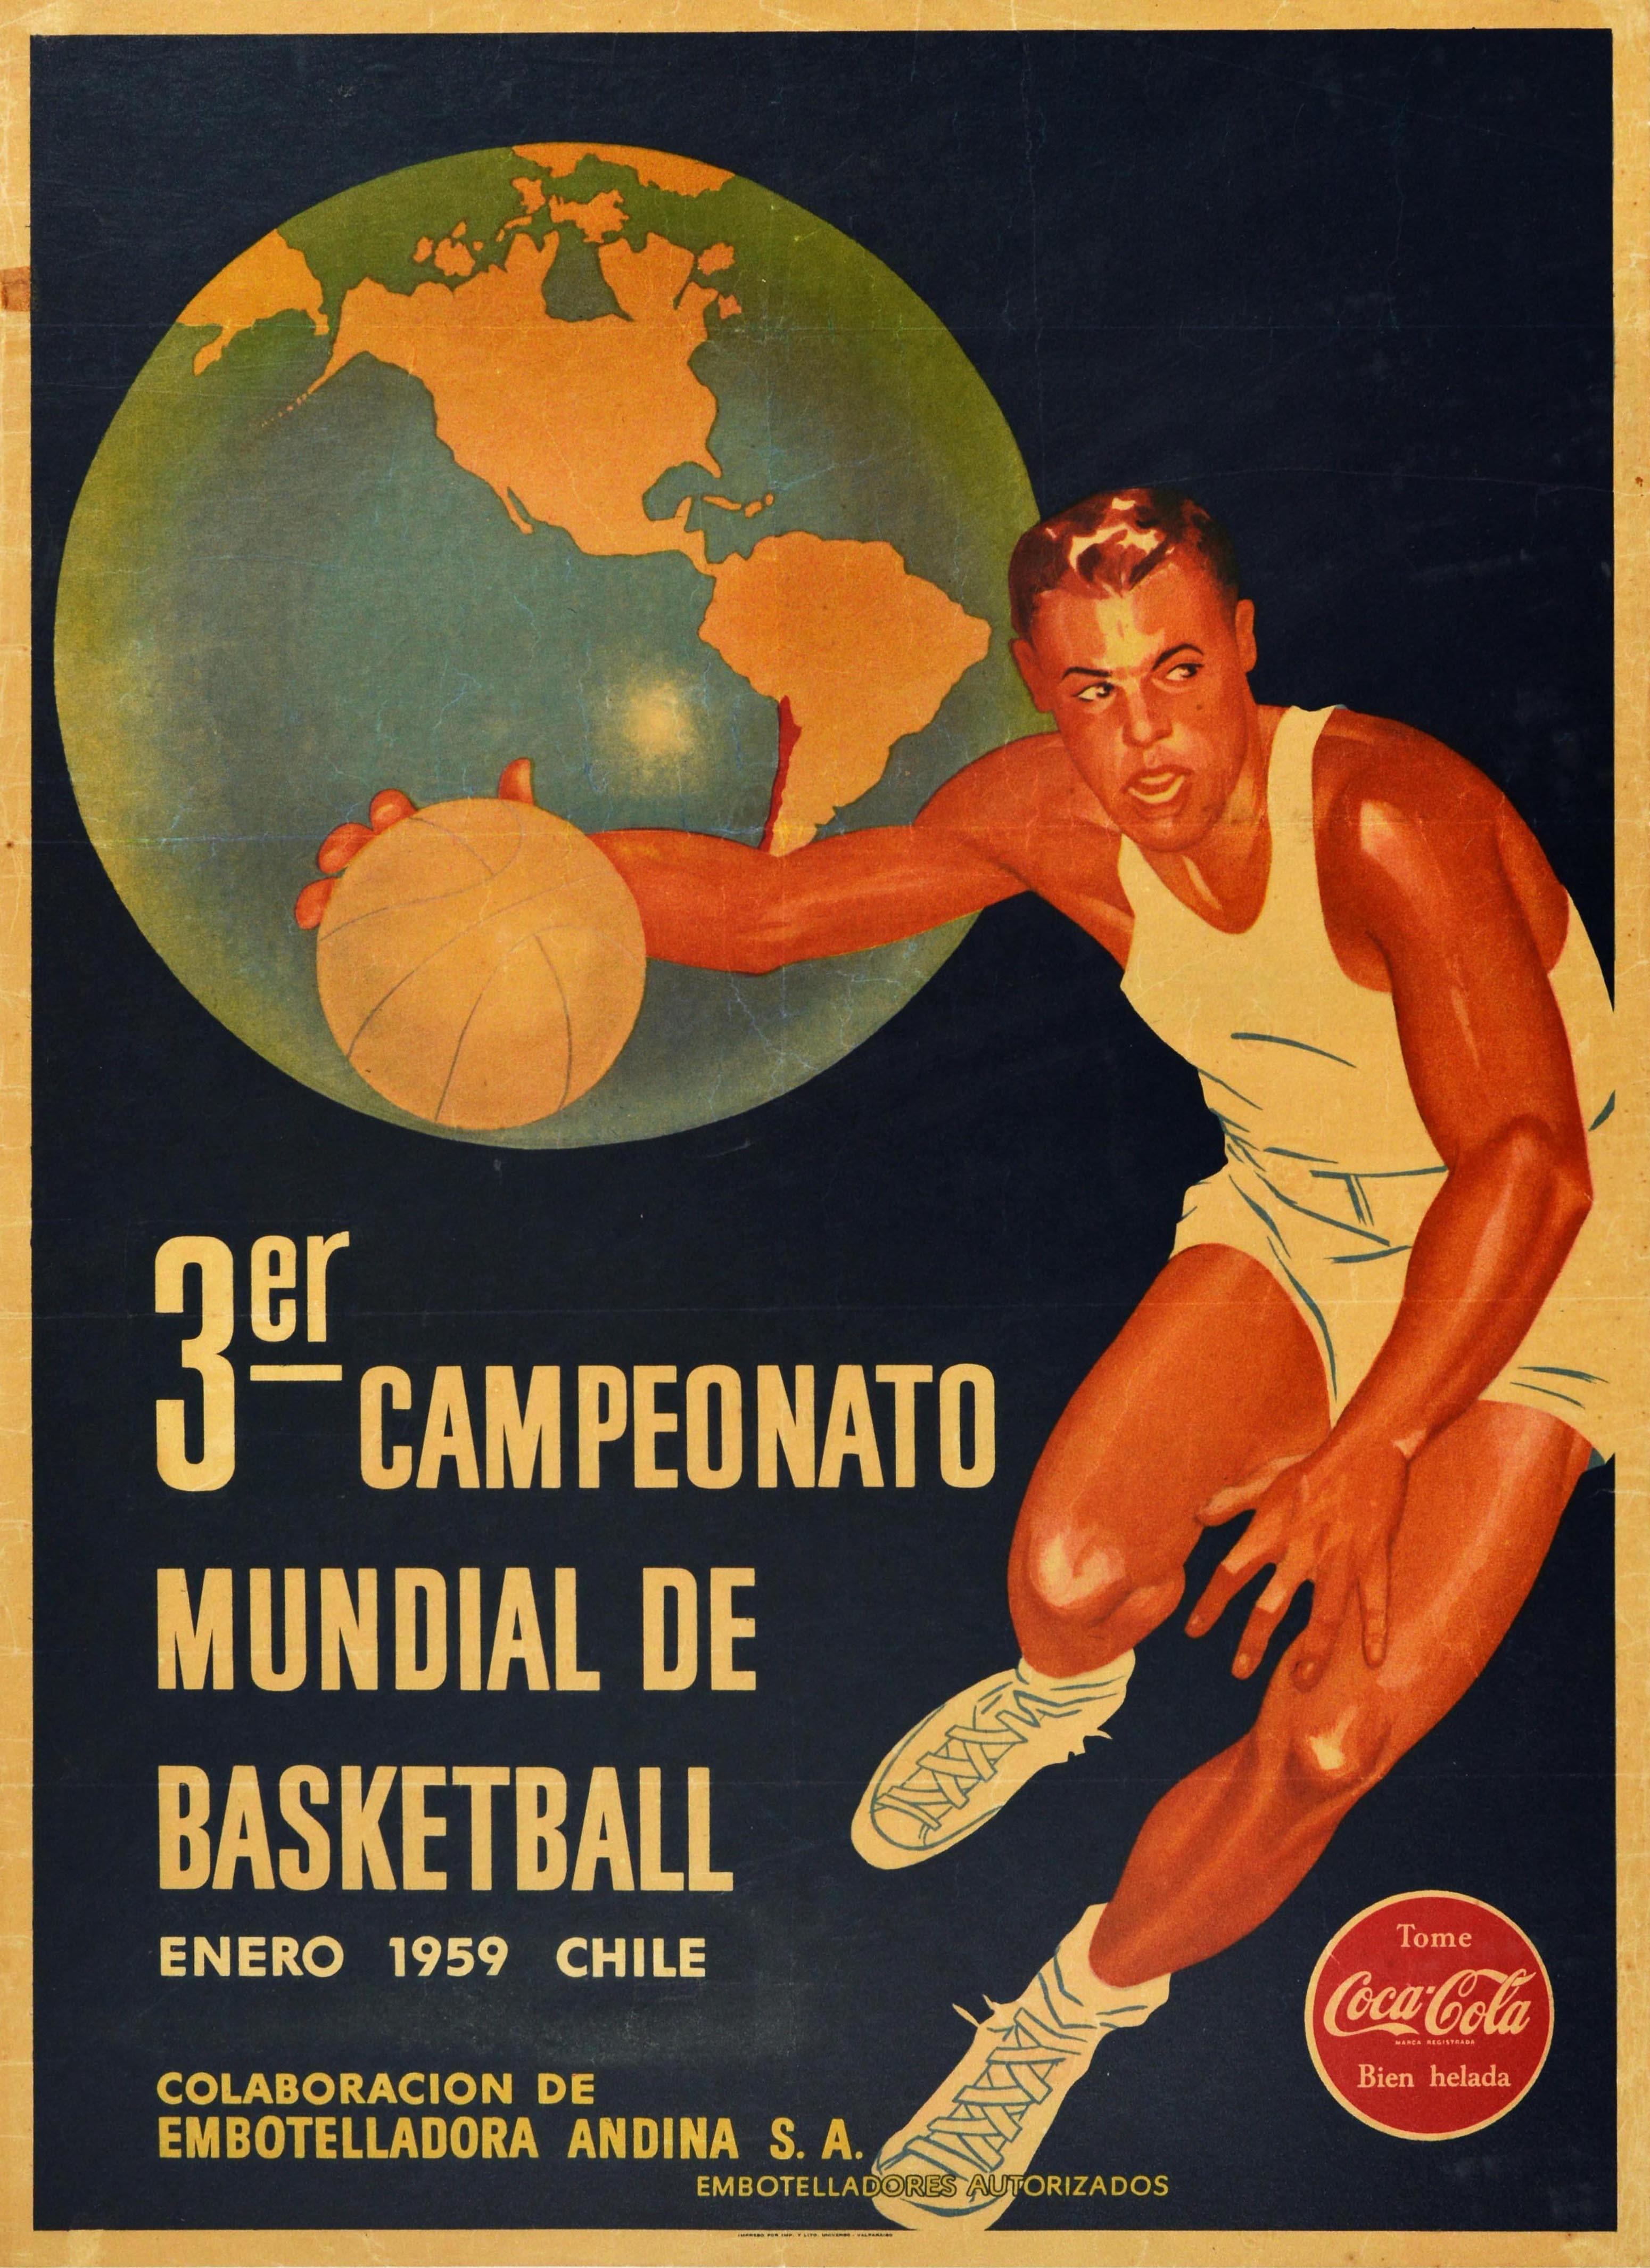 Original vintage sport poster for the 3rd World Basketball Championship held in January 1959 in Chile featuring an illustration of a basketball player in white kit and trainers dribbling the ball while running with a globe of the world marking Chile